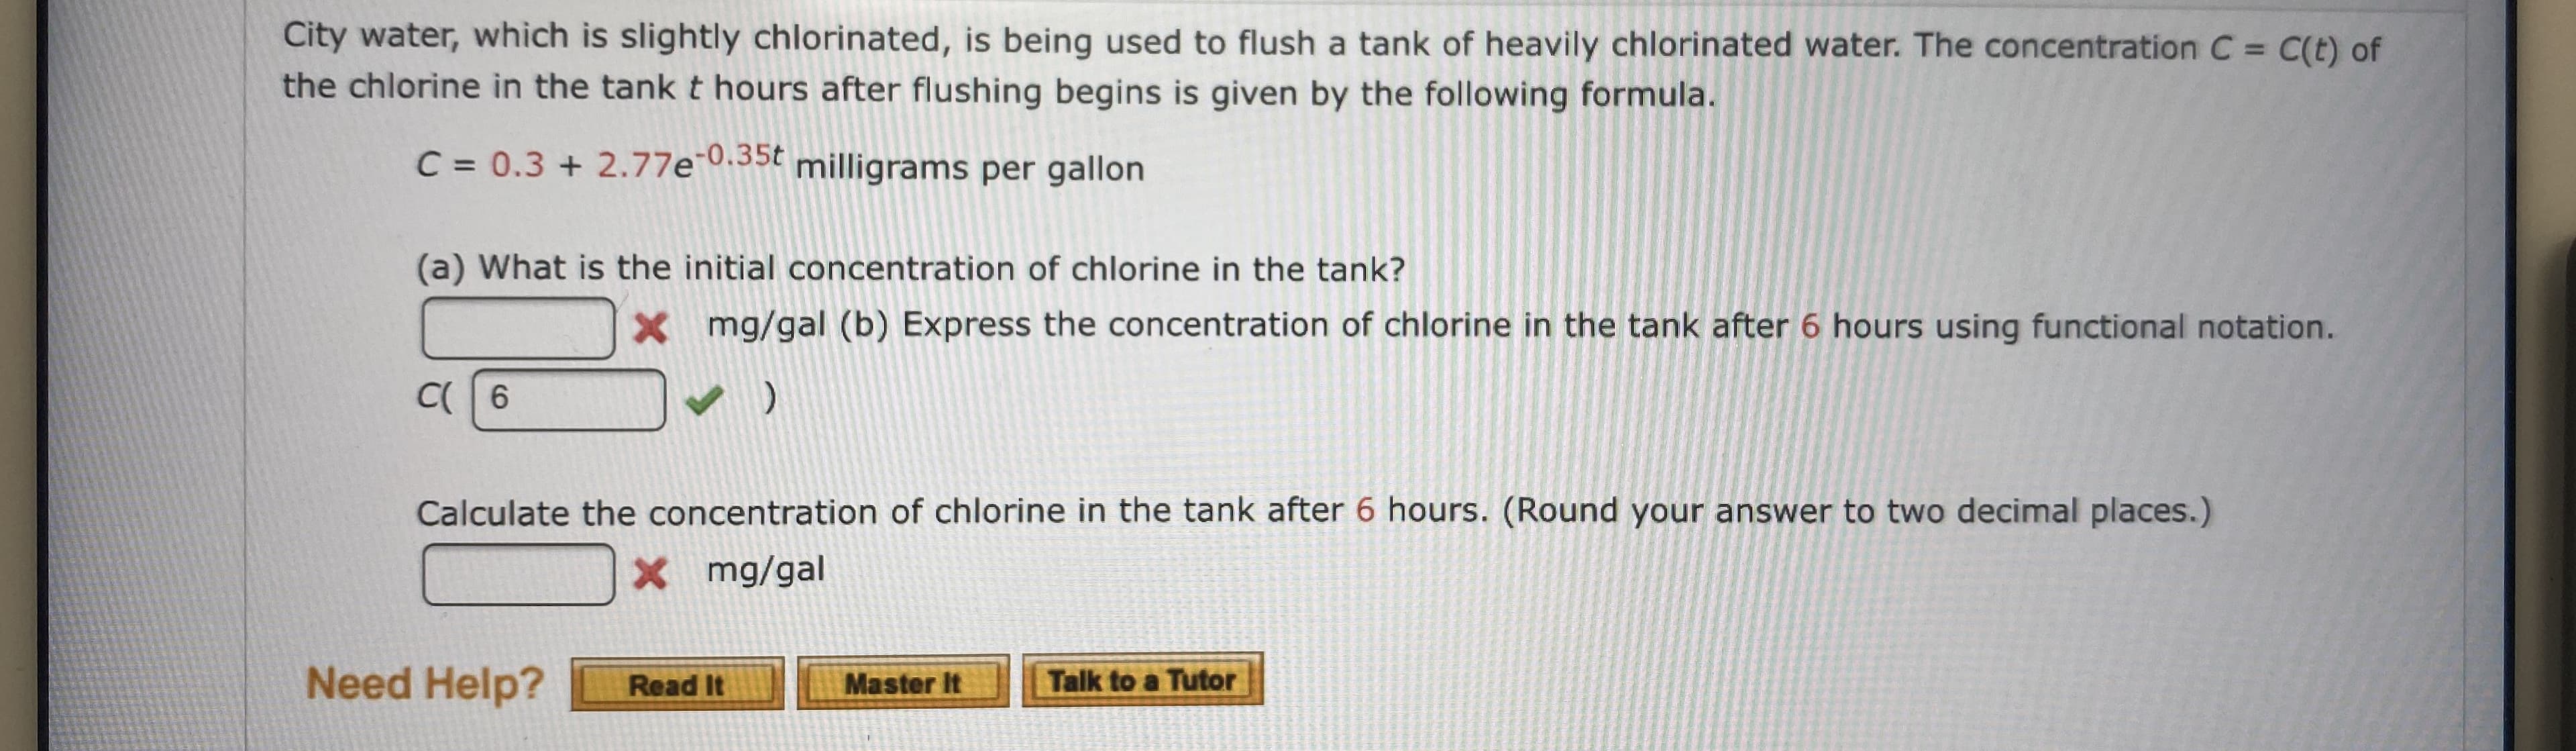 City water, which is slightly chlorinated, is being used to flush a tank of heavily chlorinated water. The concentration C = C(t) of
the chlorine in the tank t hours after flushing begins is given by the following formula.
C 0.3 2.77e35 milligrams per gallon
(a) What is the initial concentration of chlorine in the tank?
mg/gal (b) Express the concentration of chlorine in the tank after 6 hours using functional notation.
X
C 6
Calculate the concentration of chlorine in the tank after 6 hours. (Round your answer to two decimal places.)
X mg/gal
Need Help?
Talk to a Tutor
Master It
Read It
